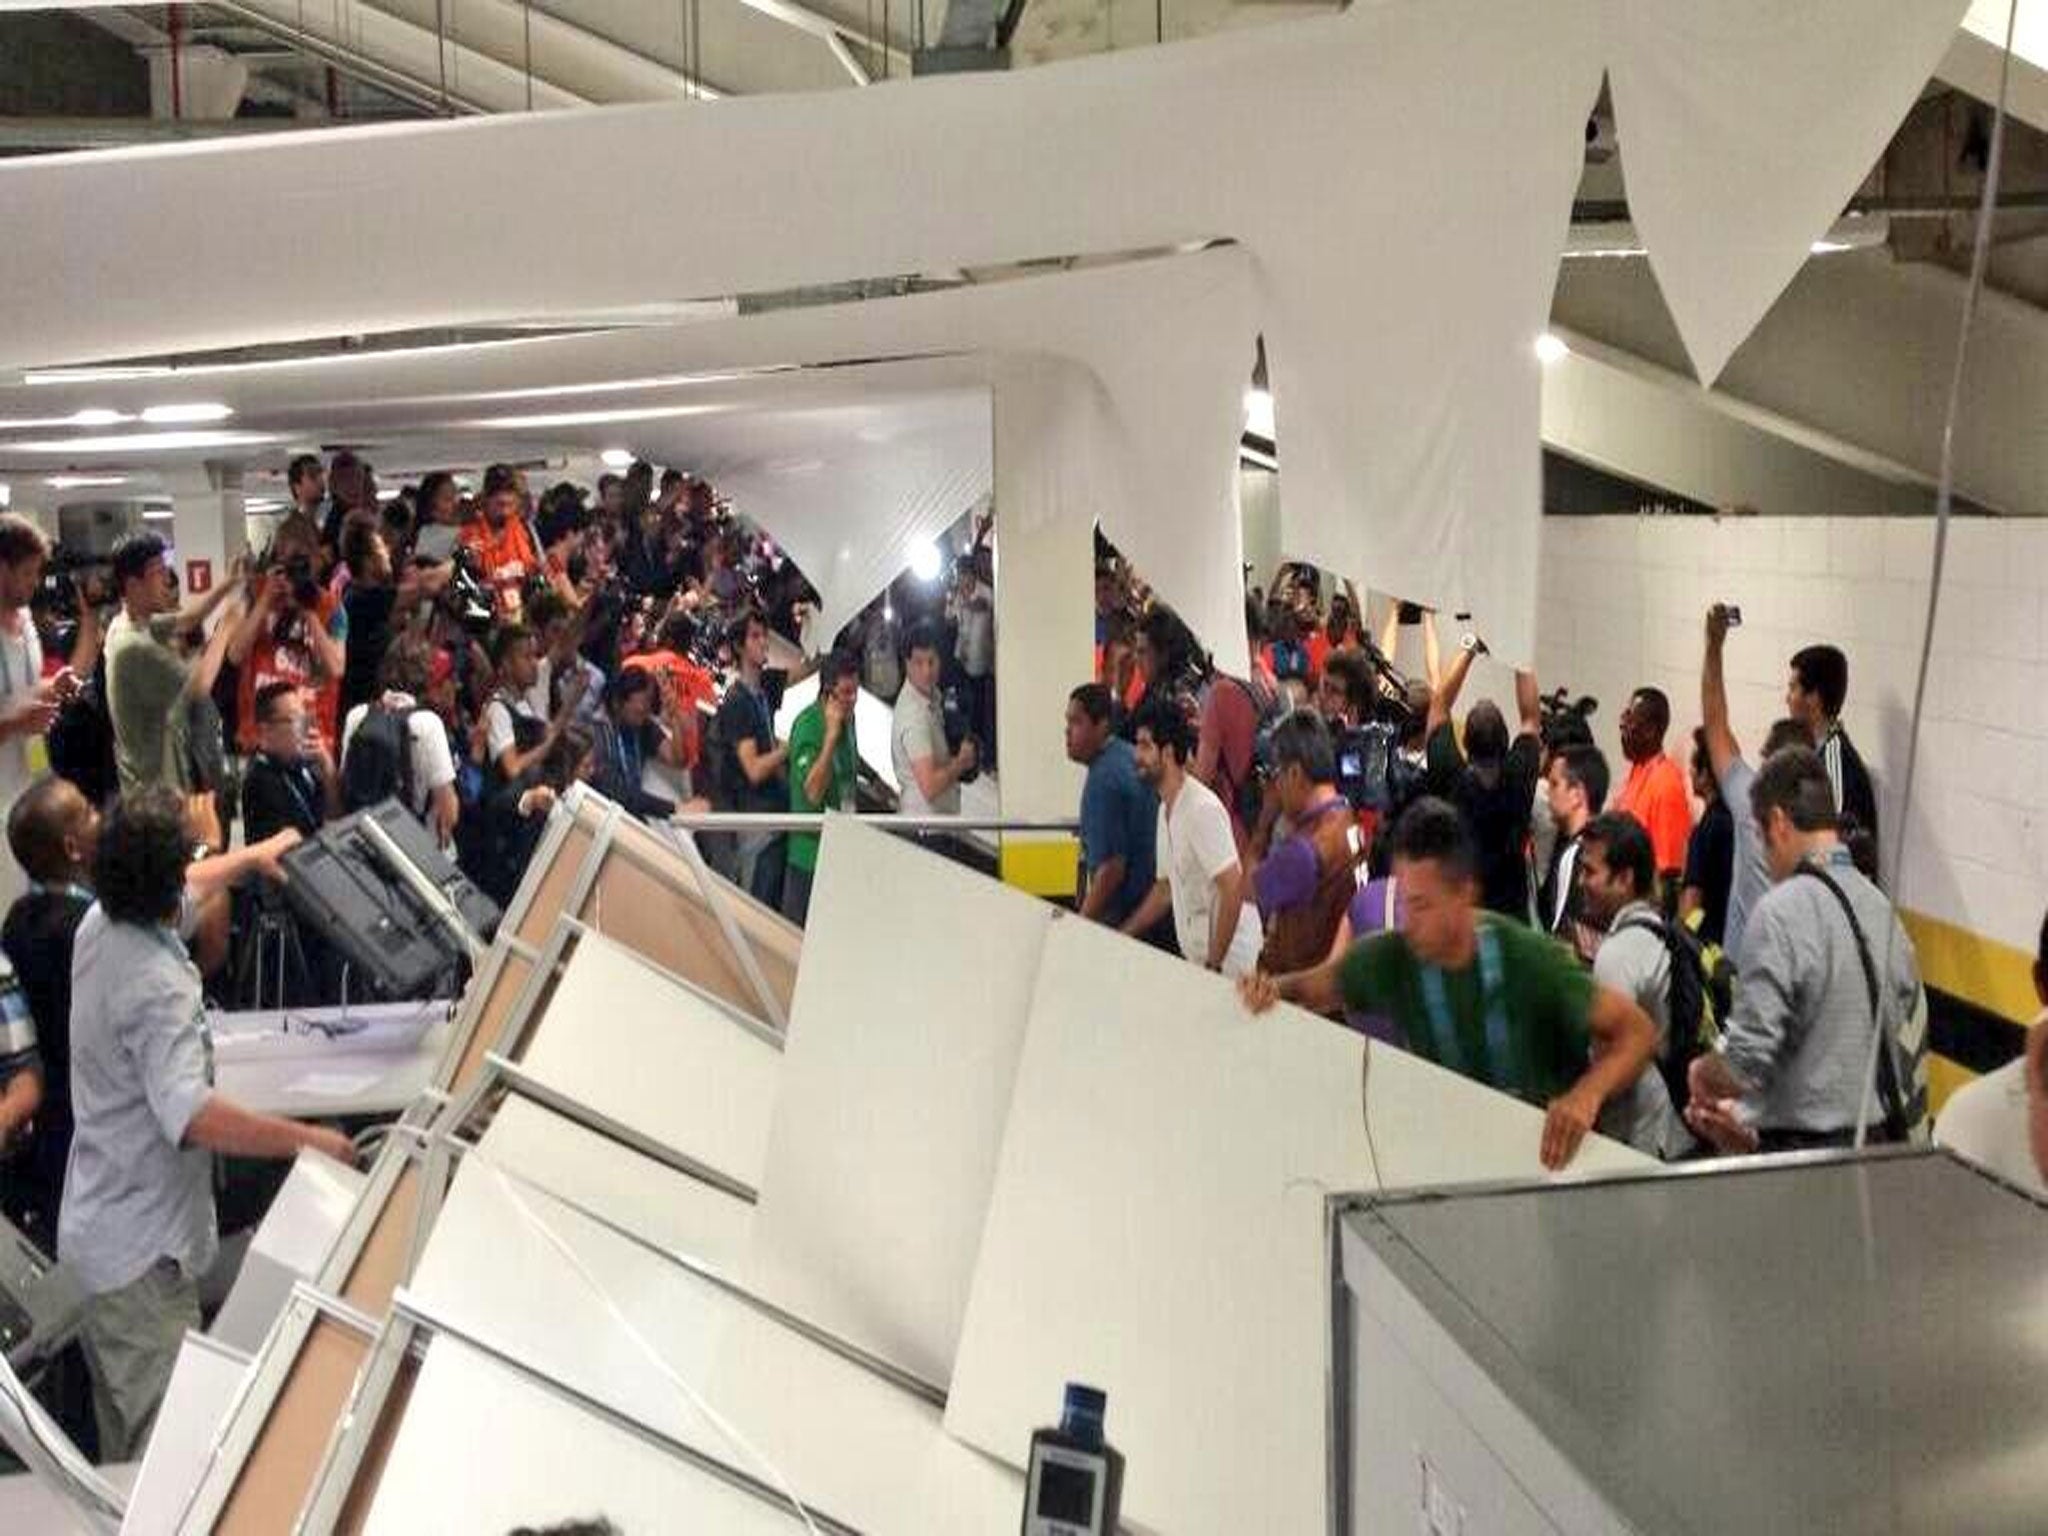 Hundreds of Chile fans stormed the media centre at the Maracana stadium